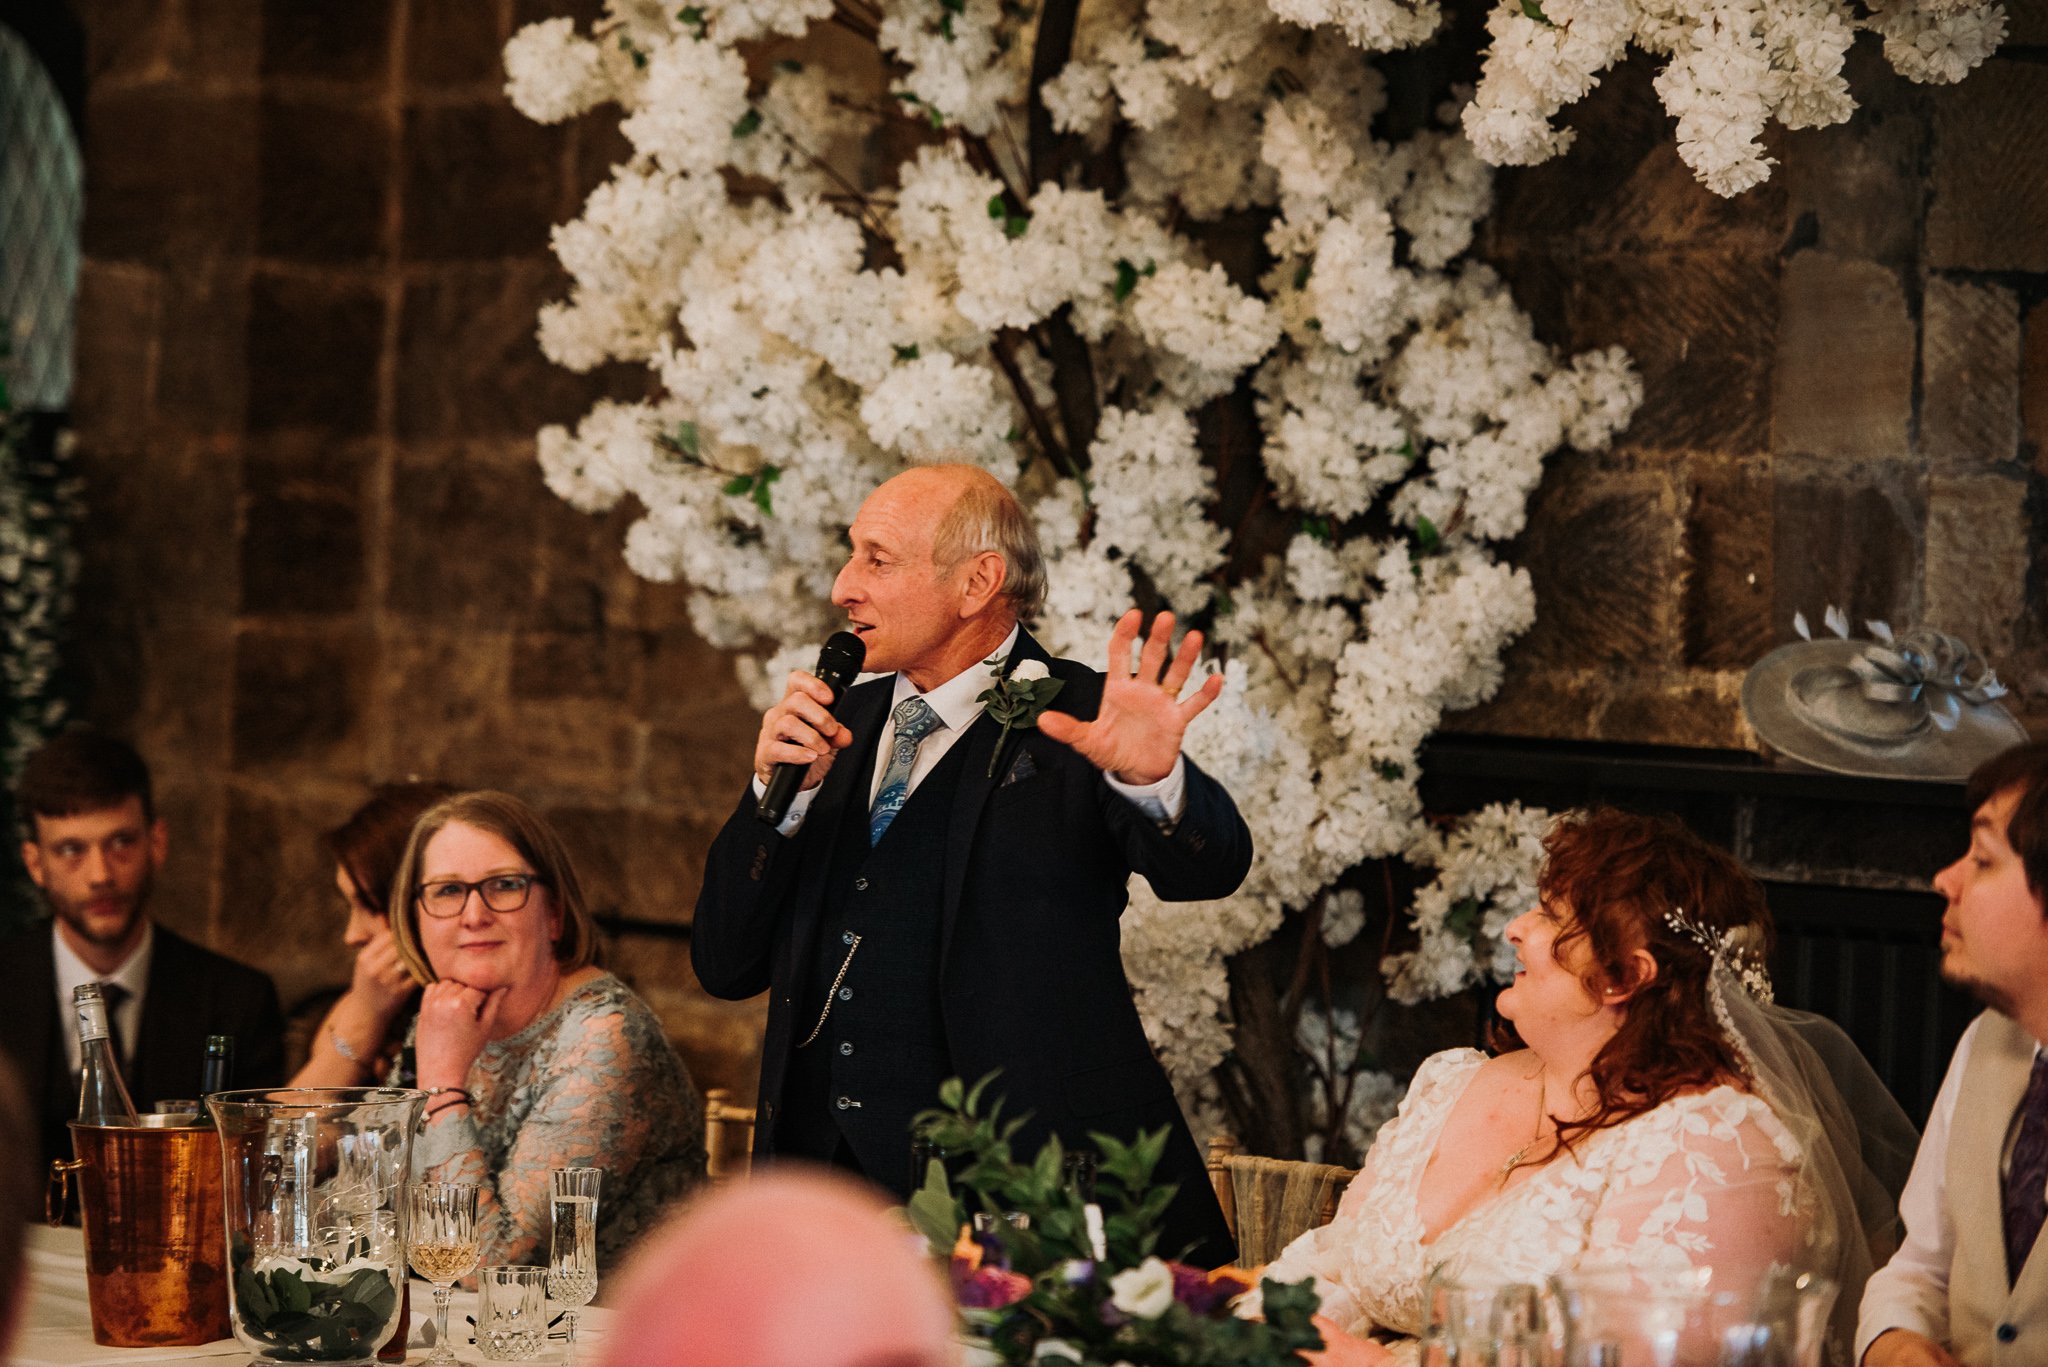 The father of the bride giving his speech to the wedding party after the meal at Sneaton Castle, Whitby.